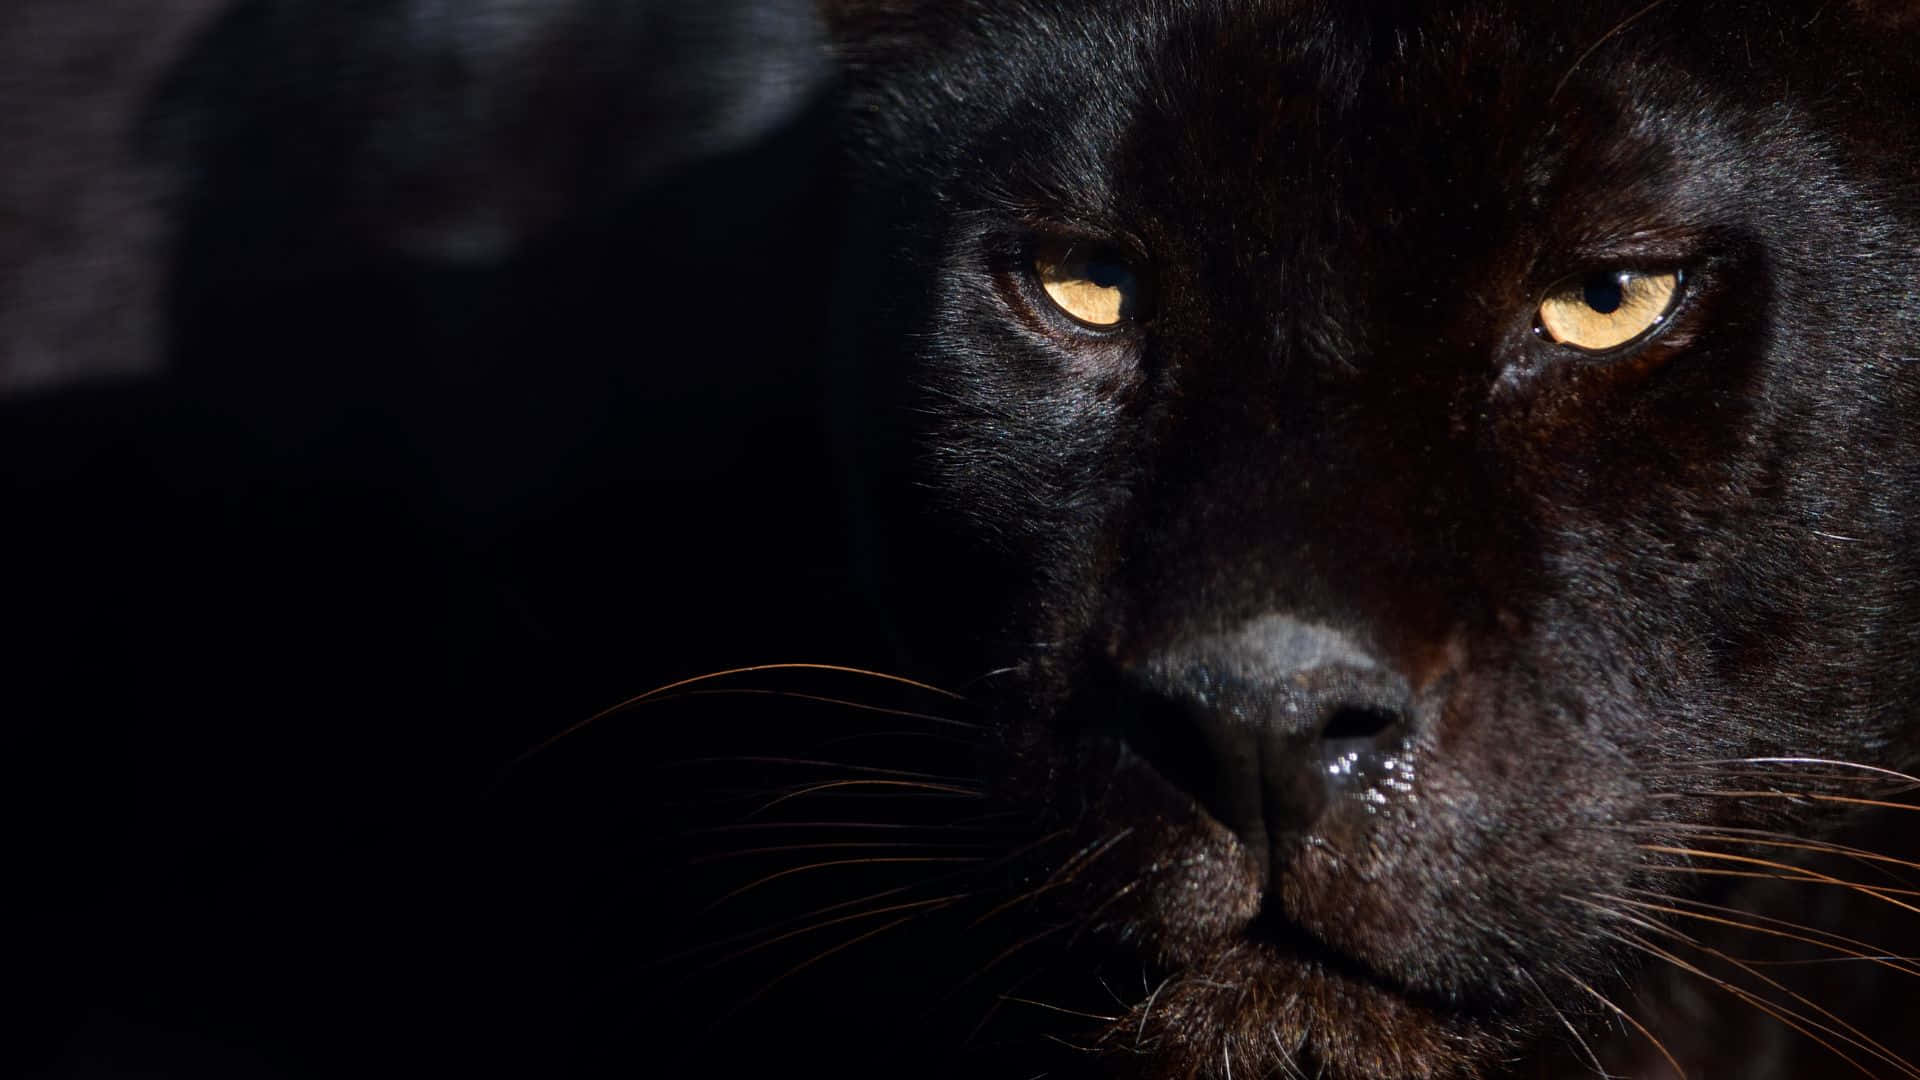 Majestic Black Panther in the Wild